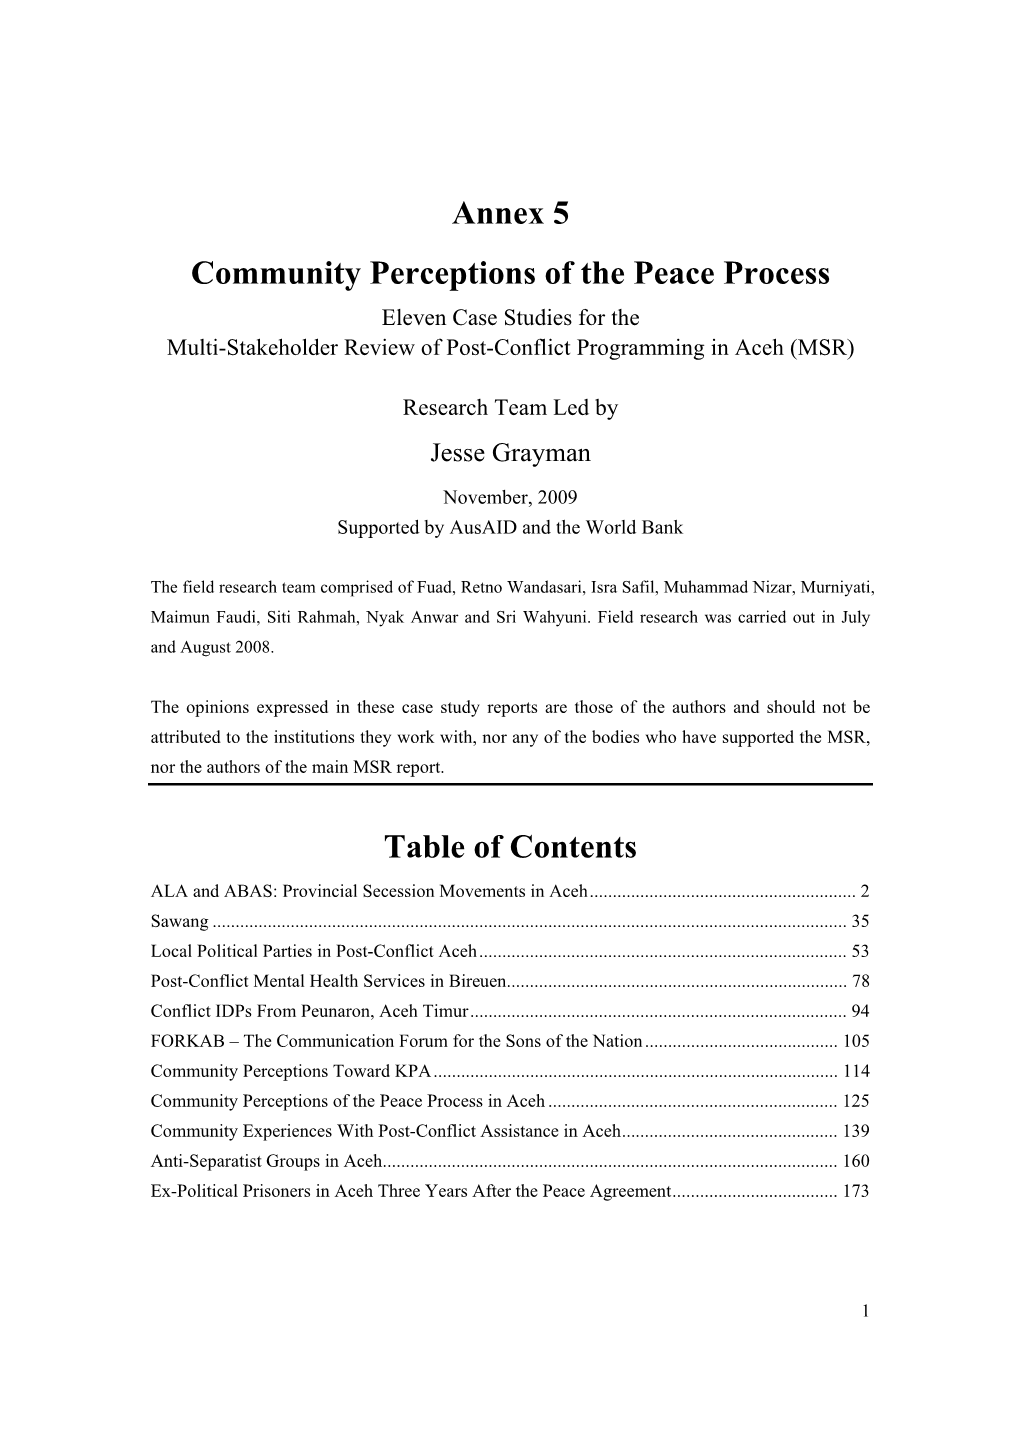 Annex 5 Community Perceptions of the Peace Process Table of Contents